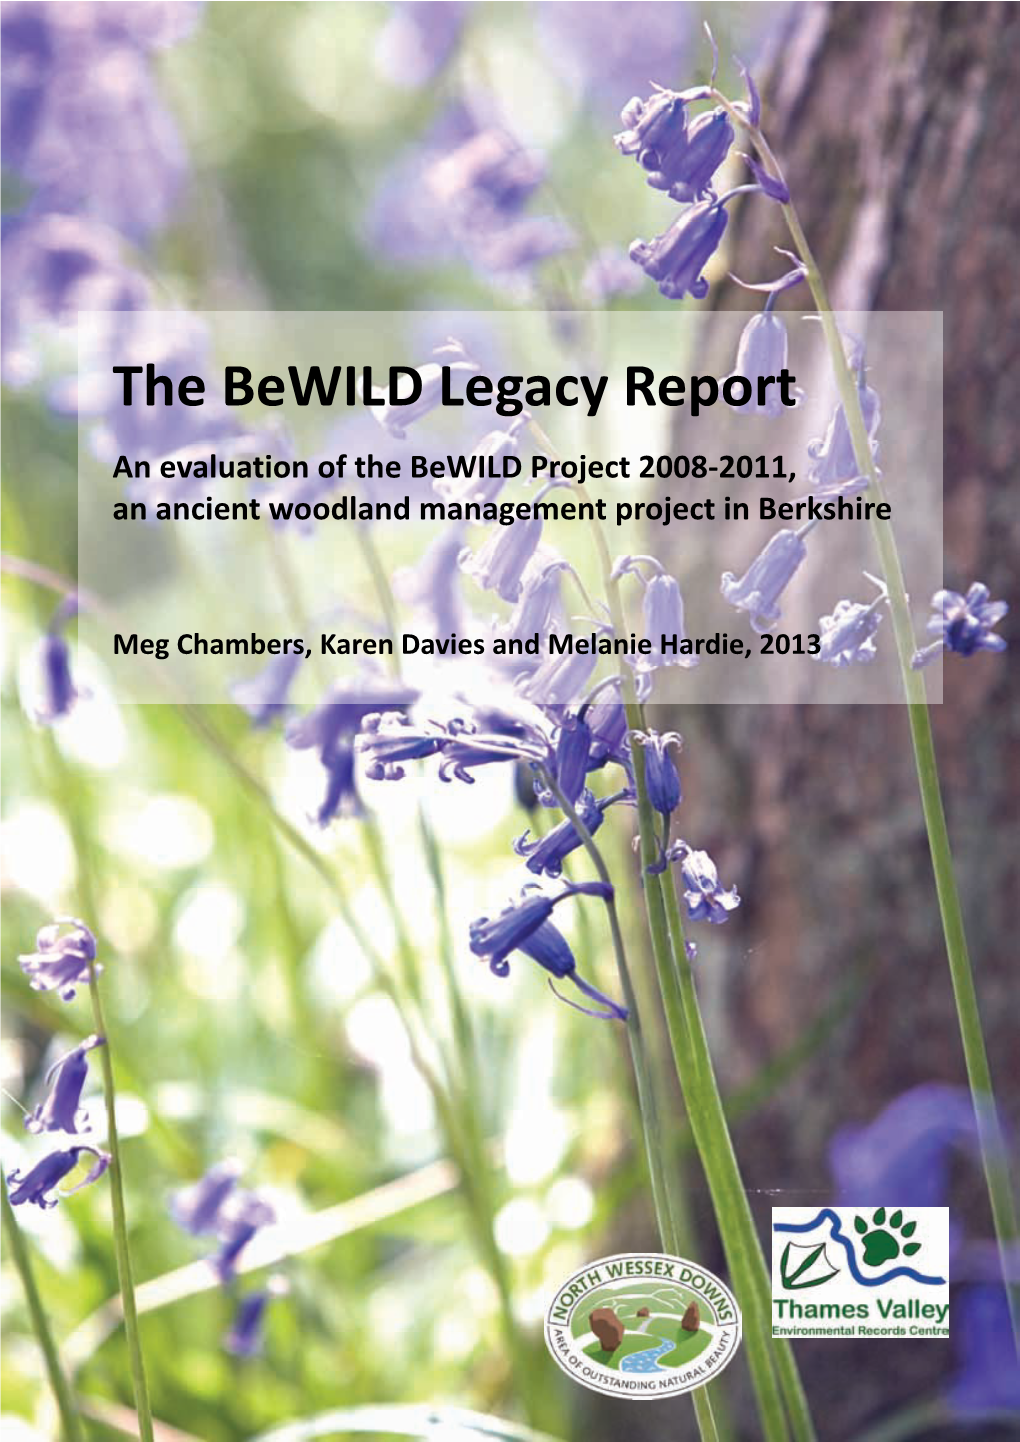 The Bewild Legacy Report